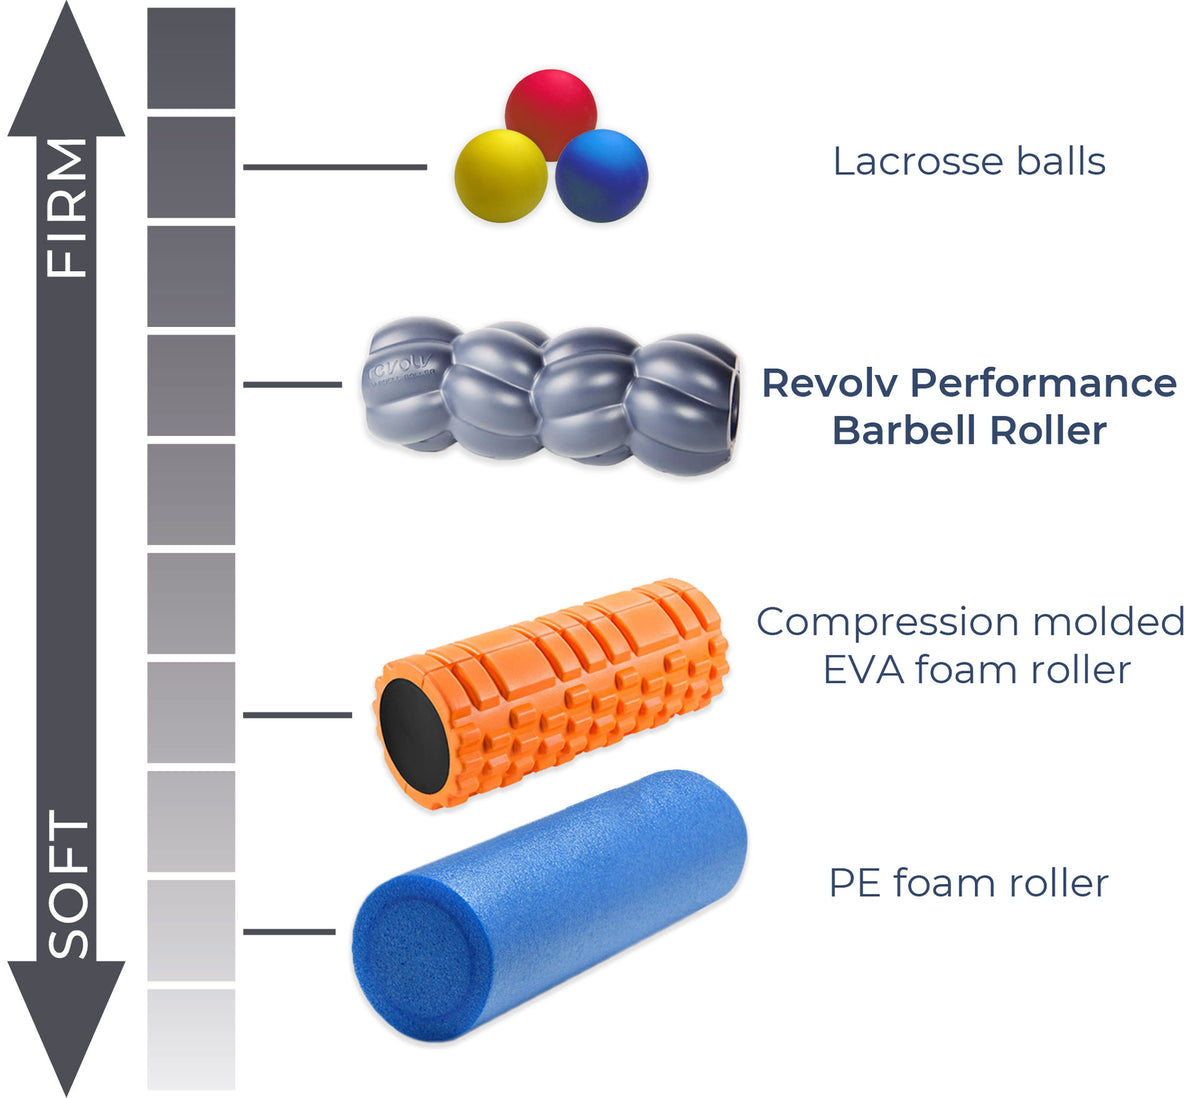 A chart which compares the firmness of the Revolv Performance Barbell Roller to other massage tools